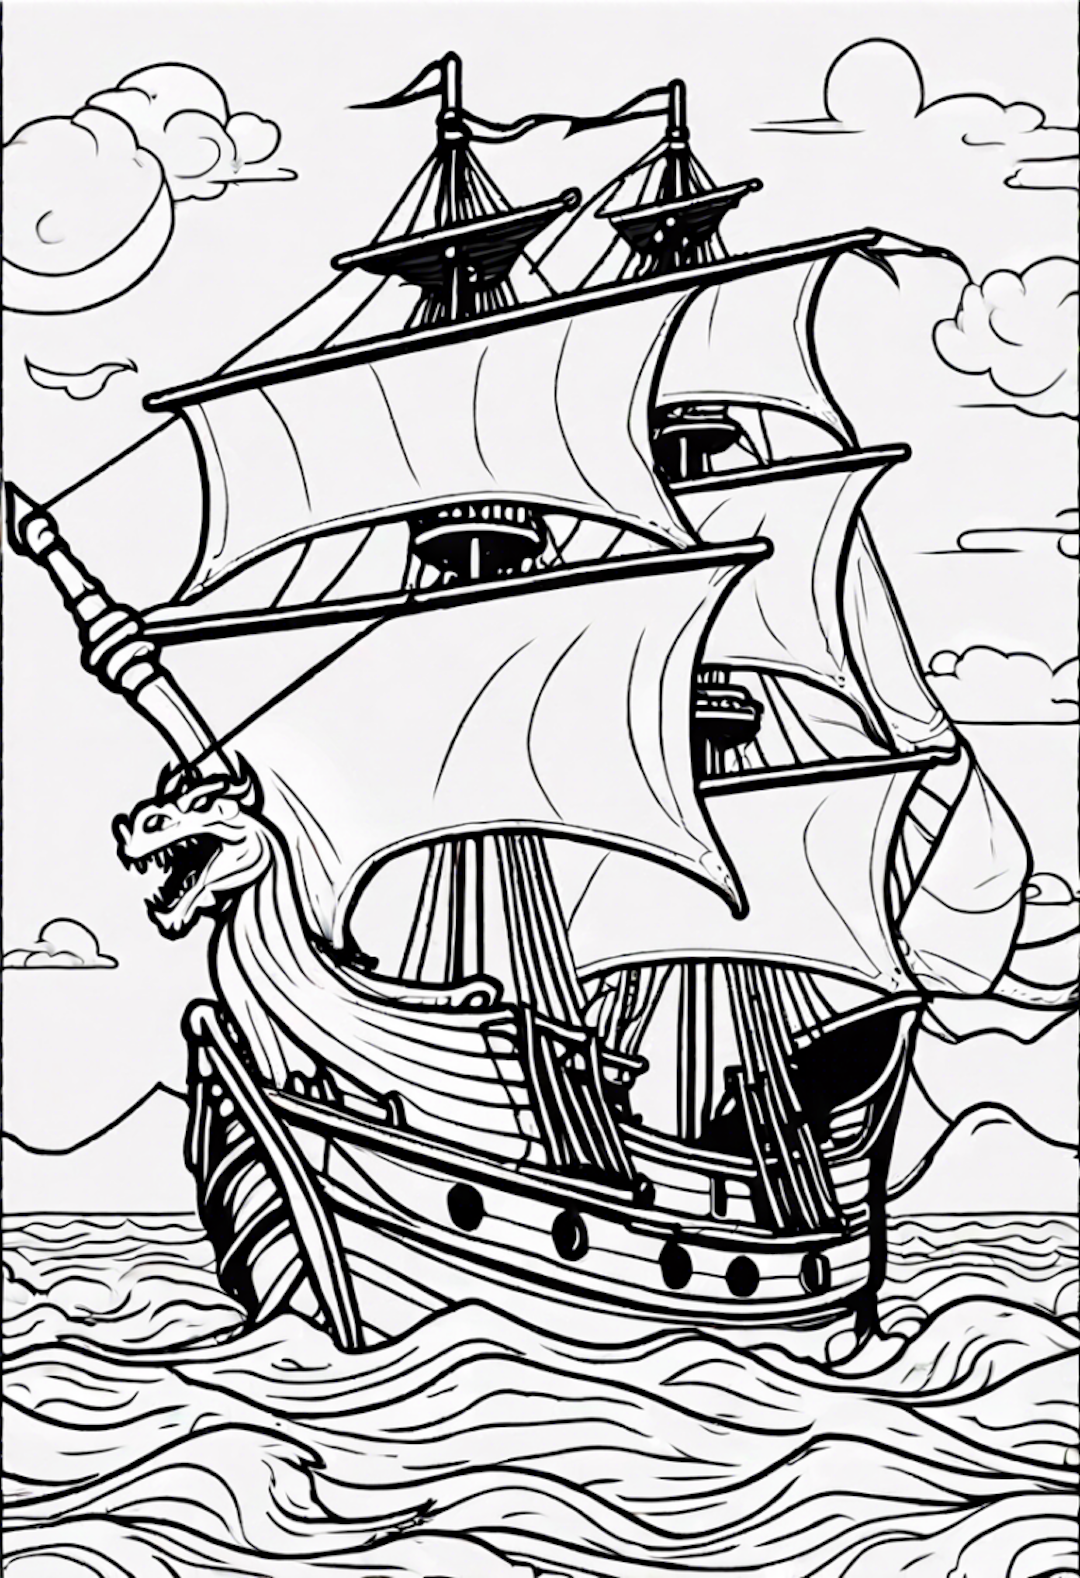 Dragon Sailing On A Pirate Ship coloring pages